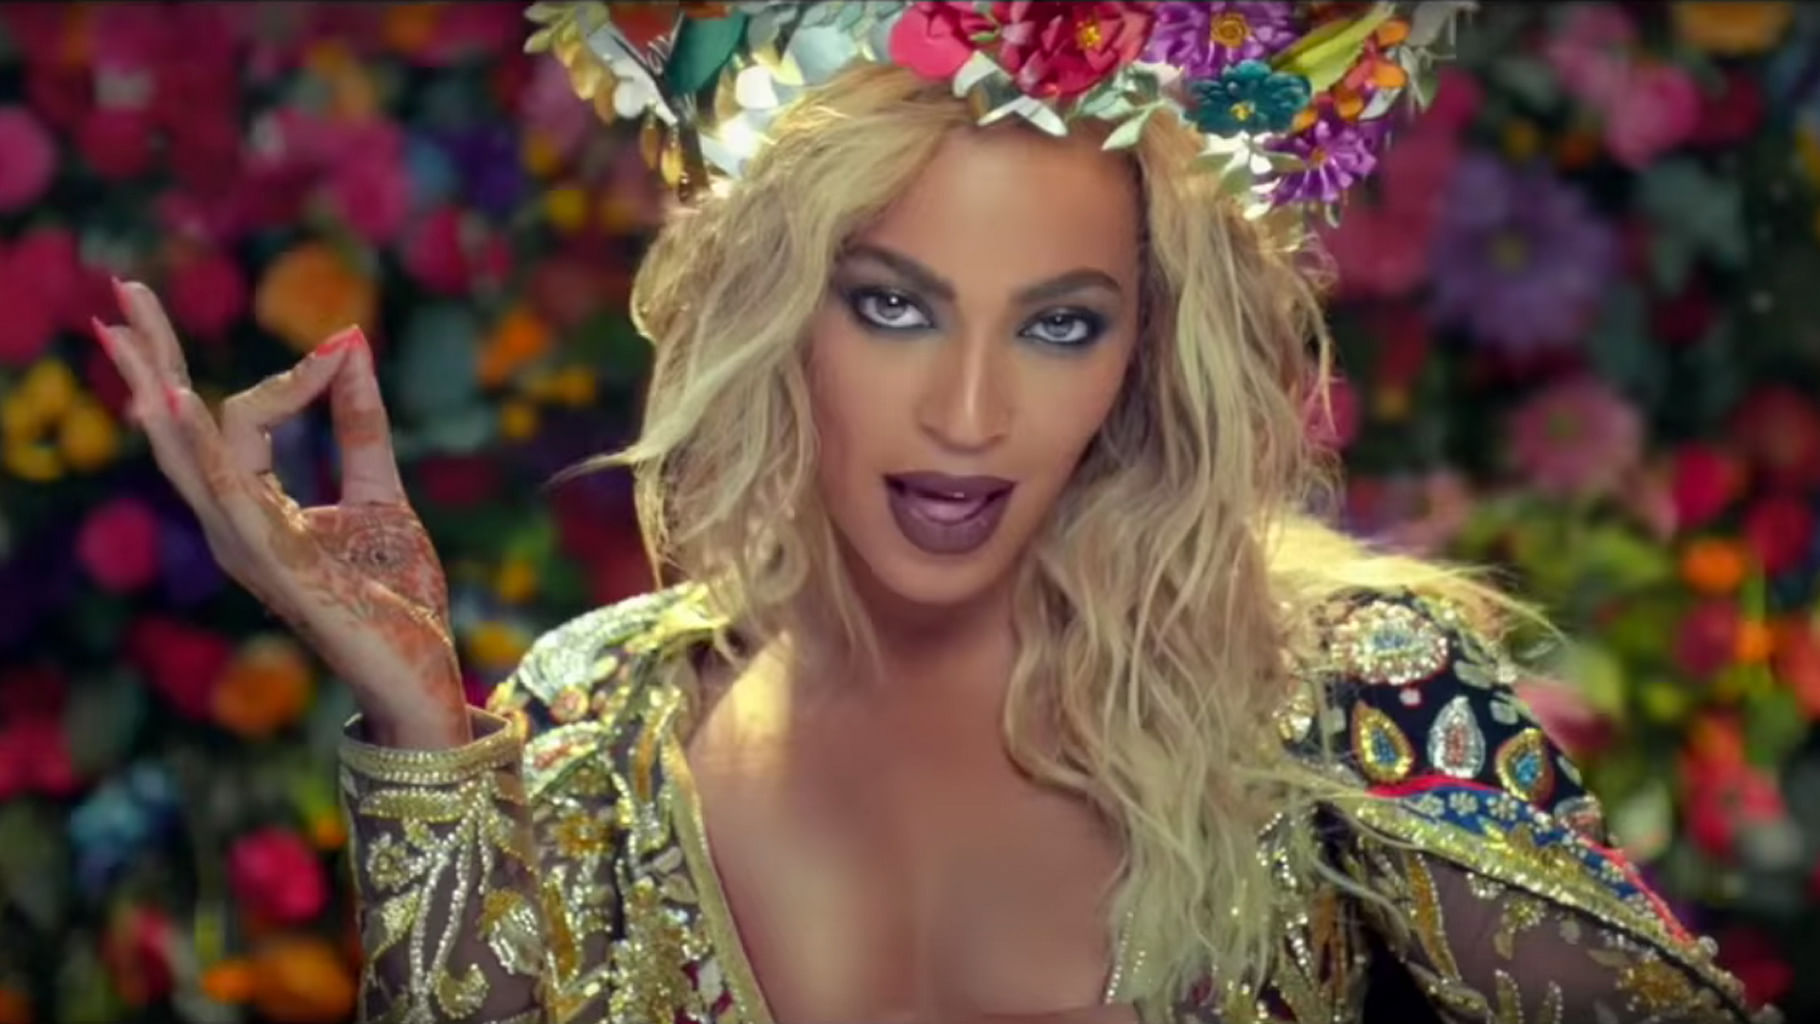 This Beyonce-Bollywood mashup is just too awesome to miss (Photo: Screenshot from the video)